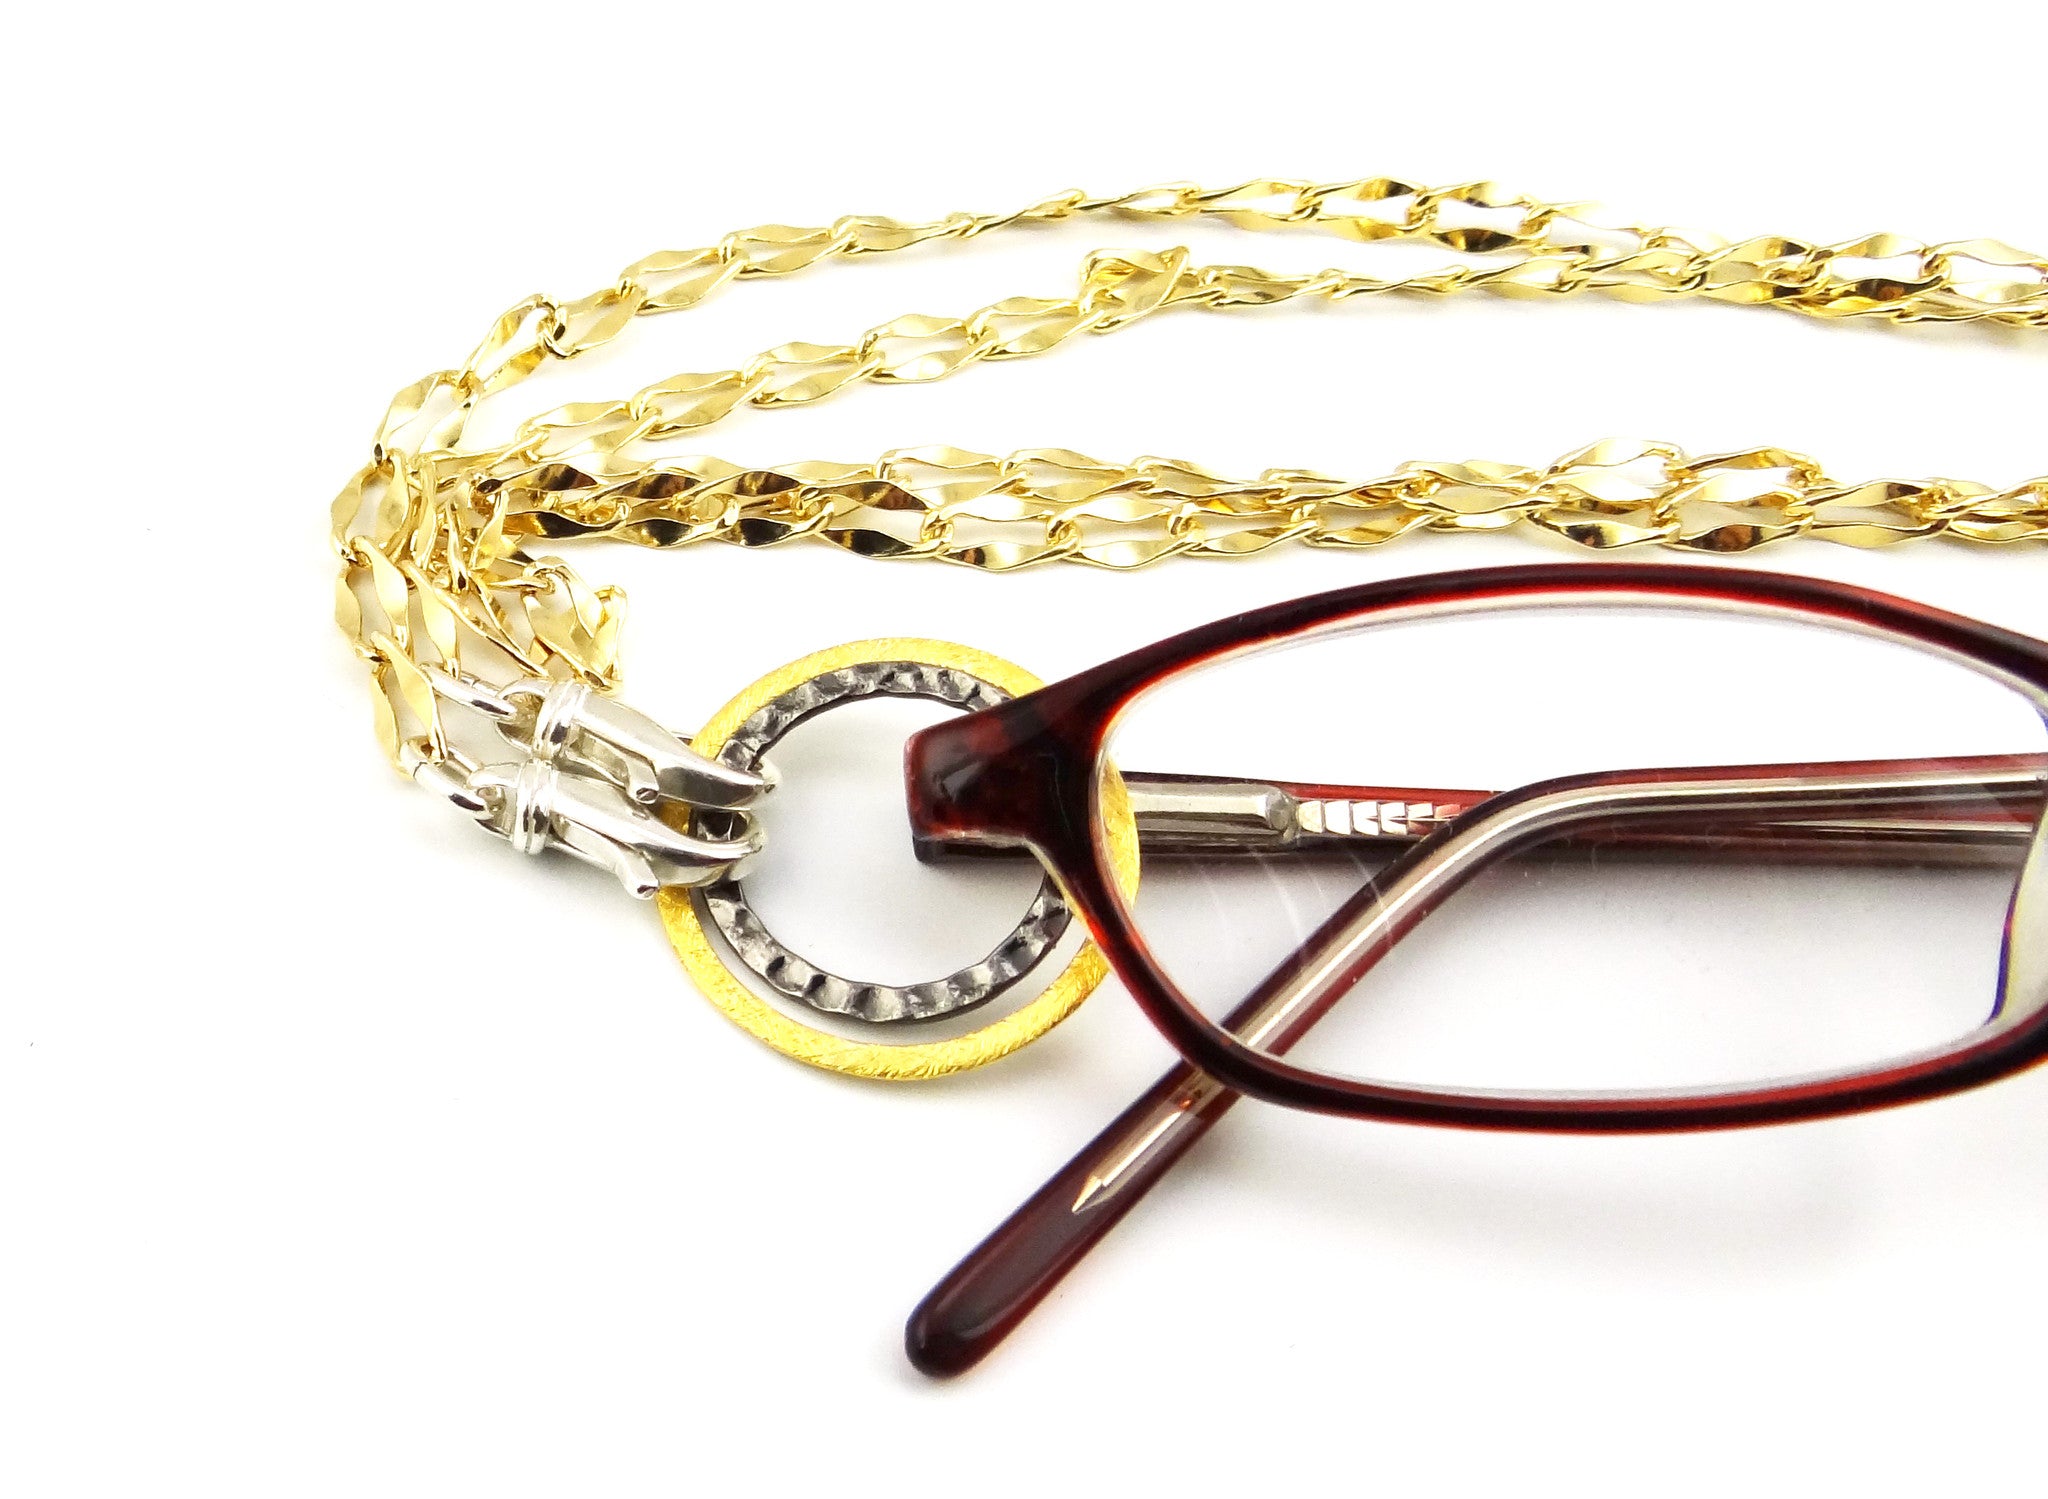 Mixed Metal - Gold, Silver, & Steel Eyeglass Necklace